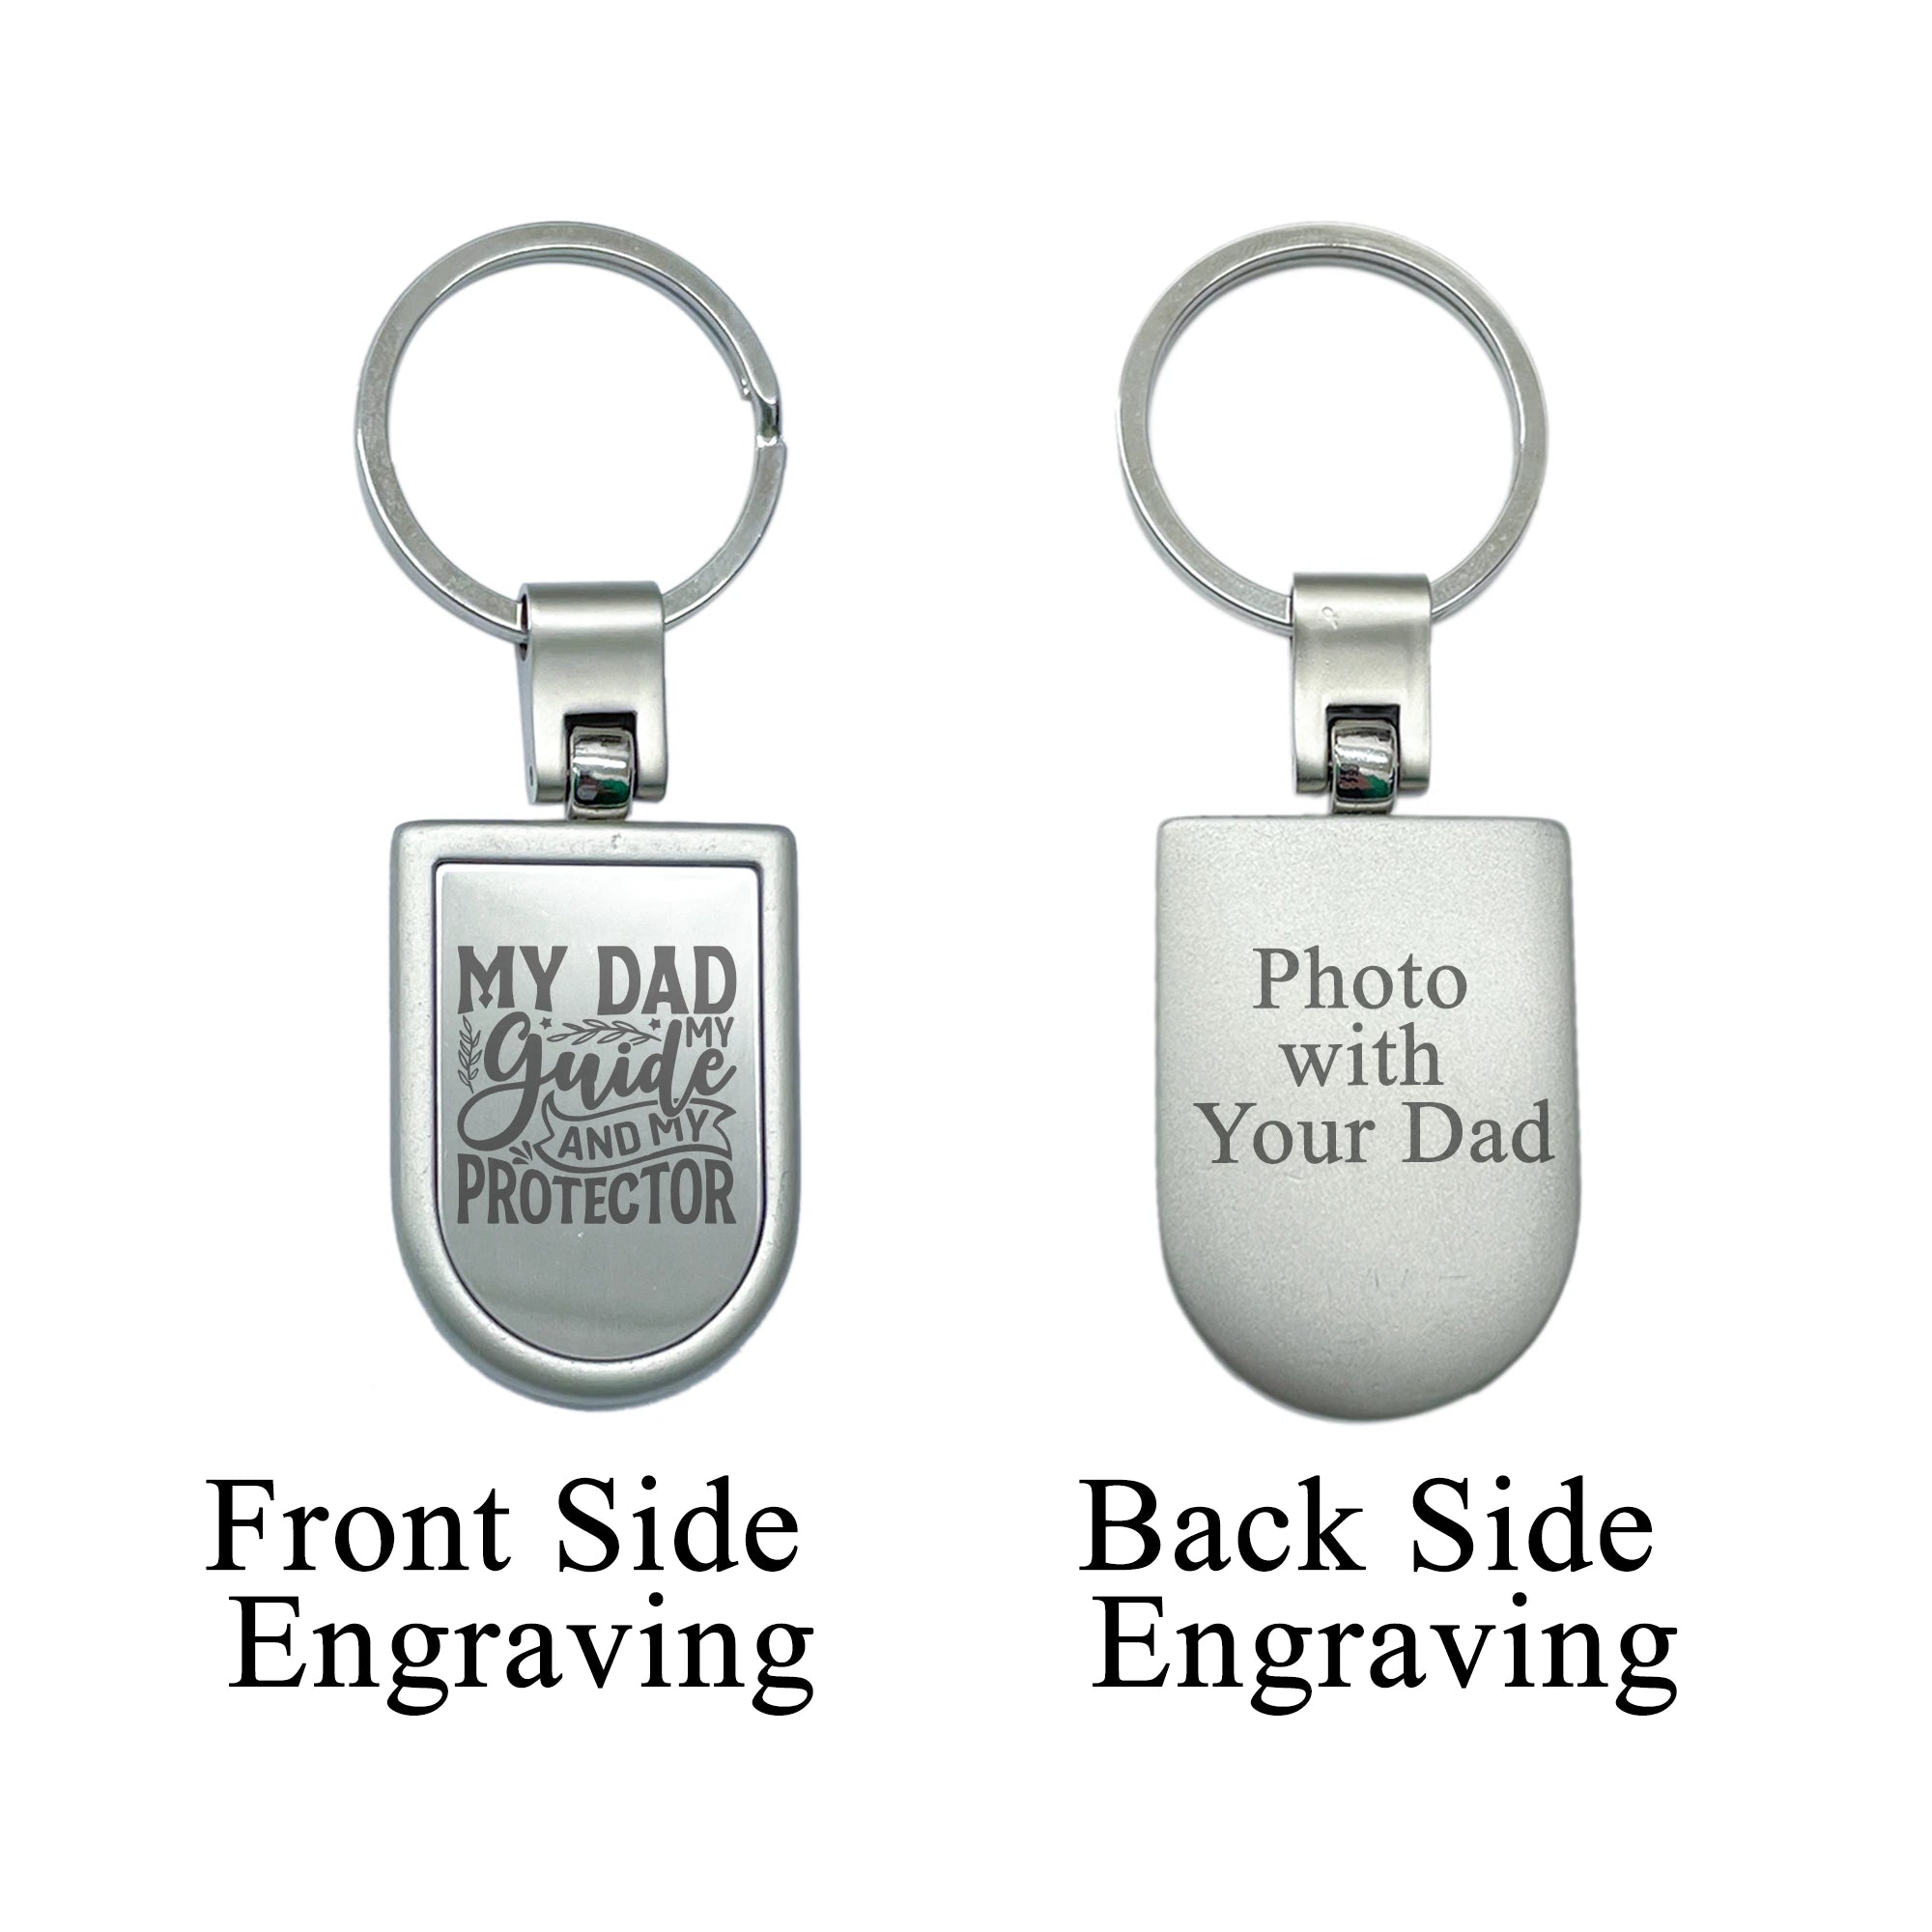 Car Keychain,Create Your Own,Custom Engraving,Customized Keychain,Gift for Her,Gift for Him,Holiday Gift,Personalized Keyring,Photo Engraving,Shield Shape,Split Key Ring,Stainless Steel,best friend keychain